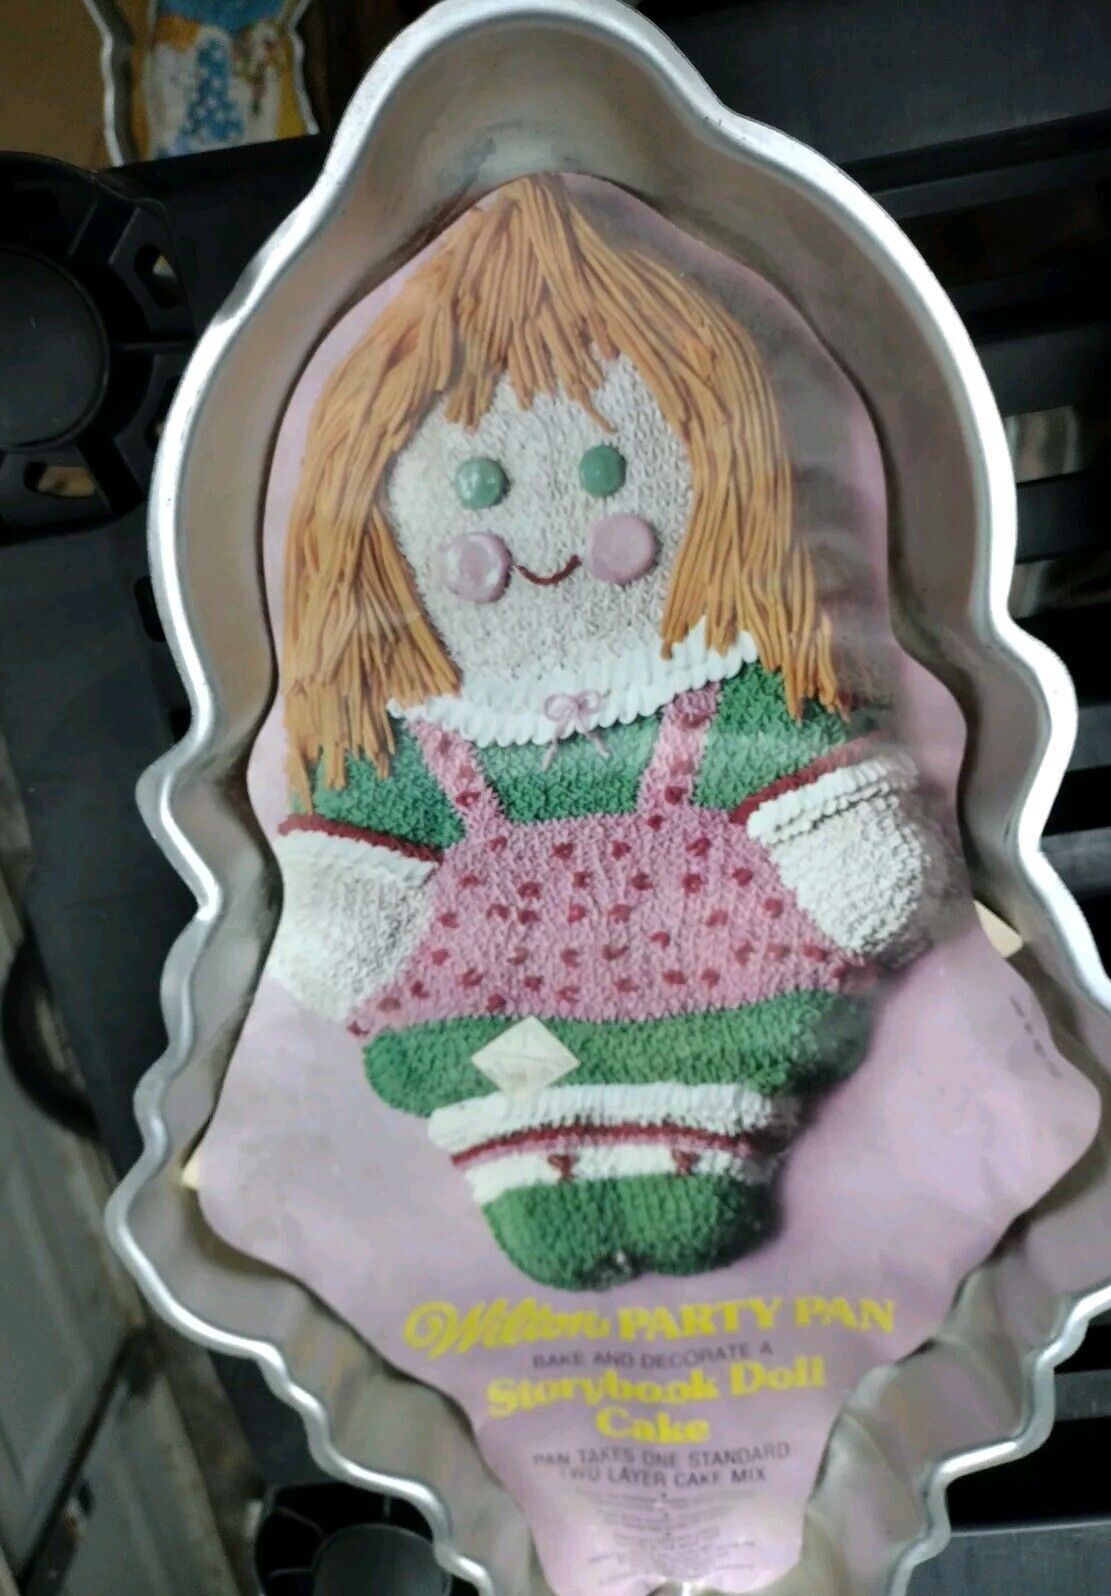 Wilton Cake Party Pan Bake And Decorate A Storybook Doll Cake 1971 One Cake Mix